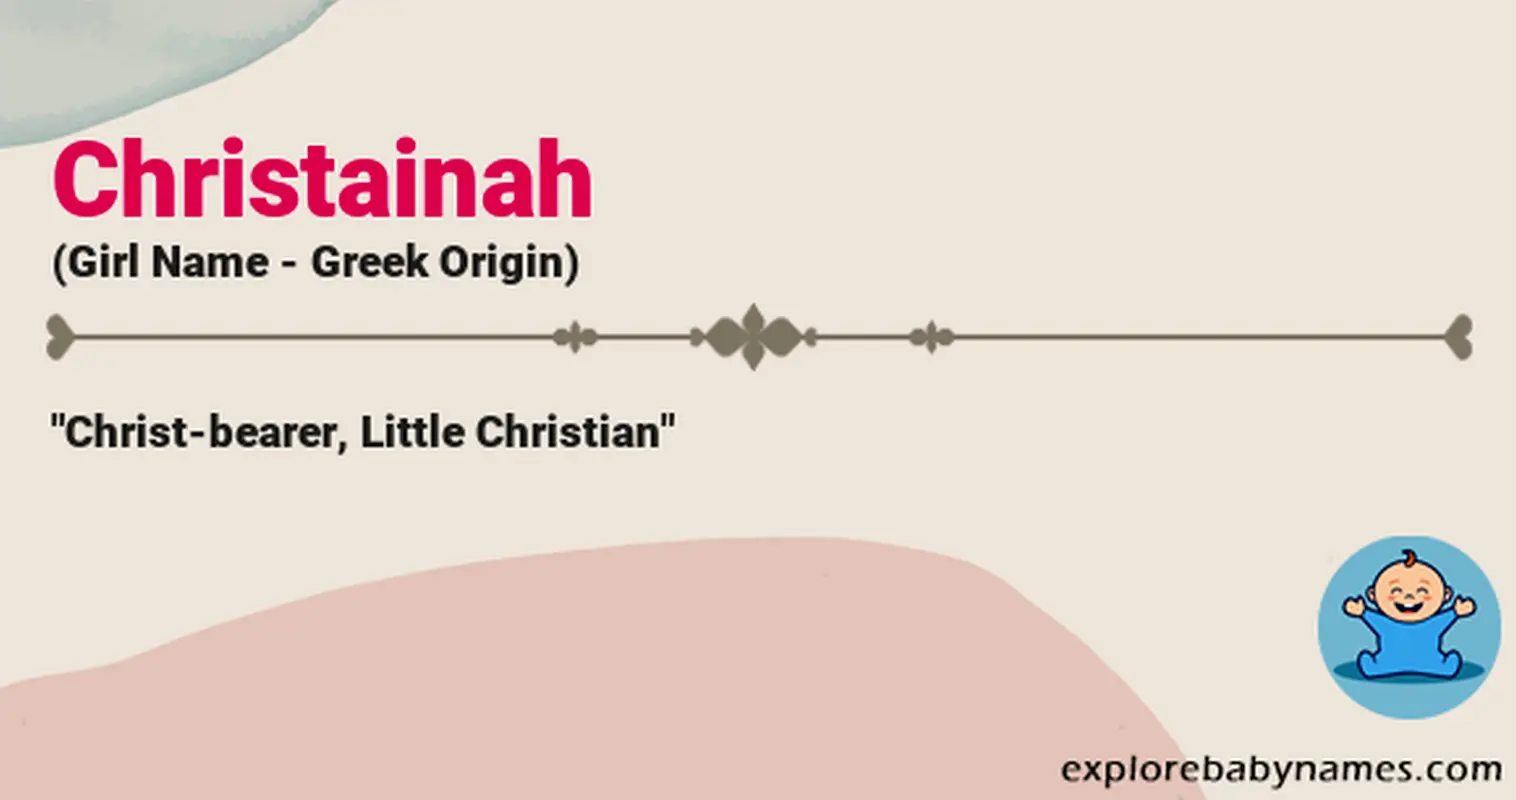 Meaning of Christainah